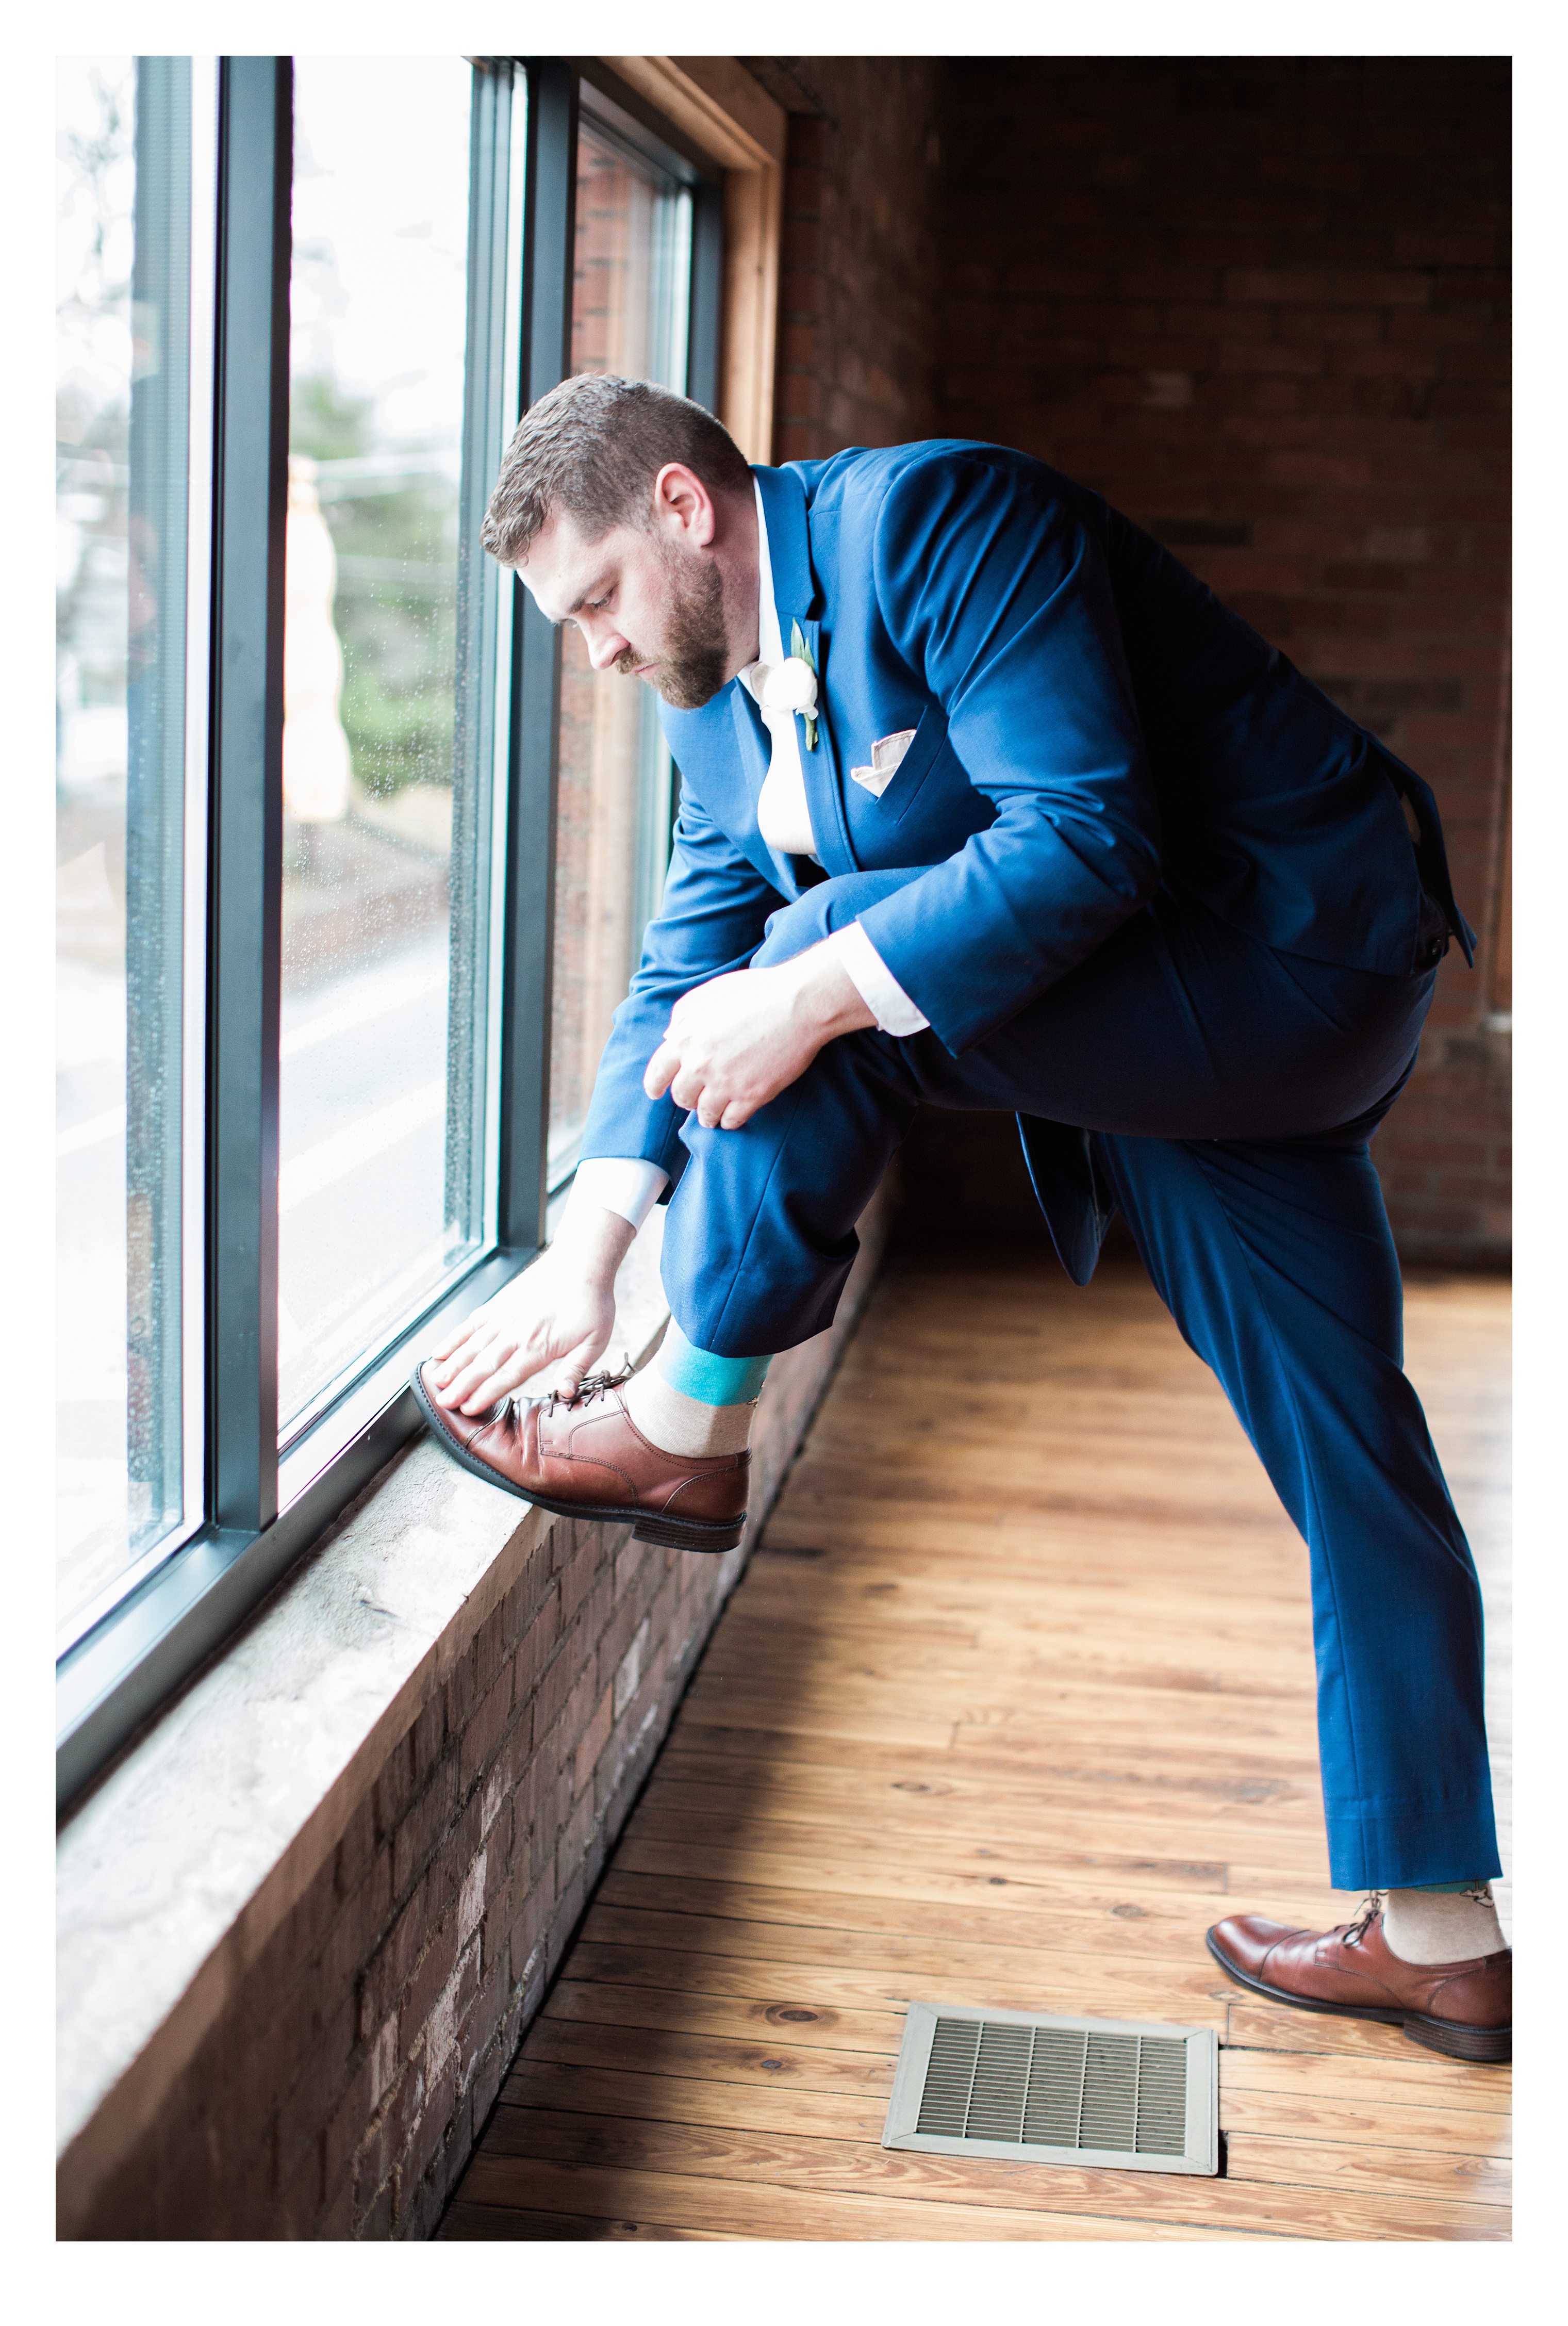 The Groom putting on his shoes